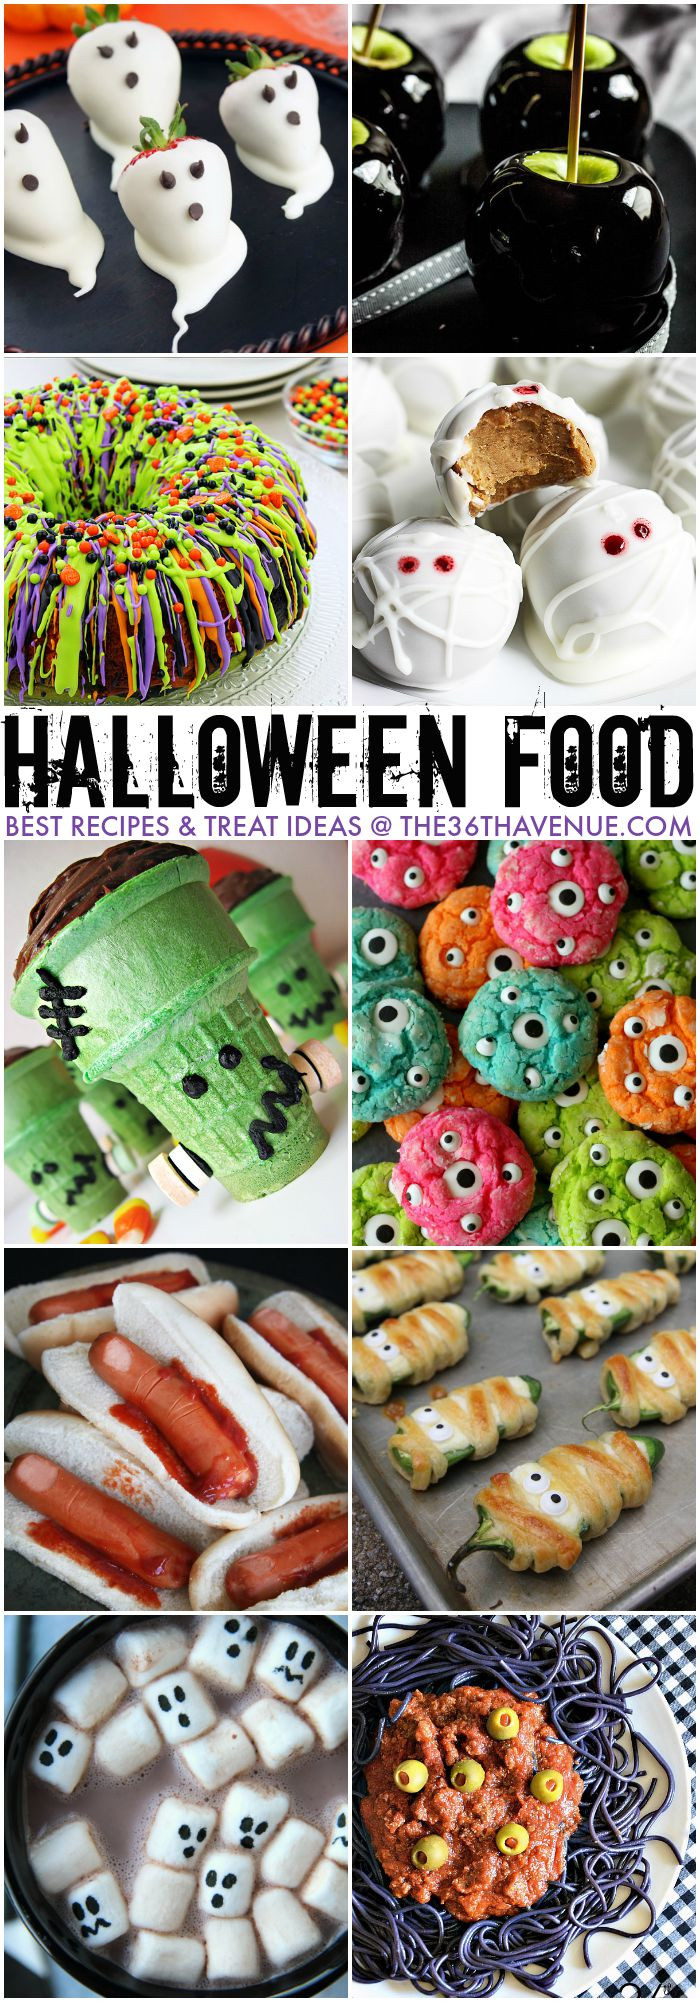 Best Halloween Desserts
 Halloween Best Treats and Recipes The 36th AVENUE